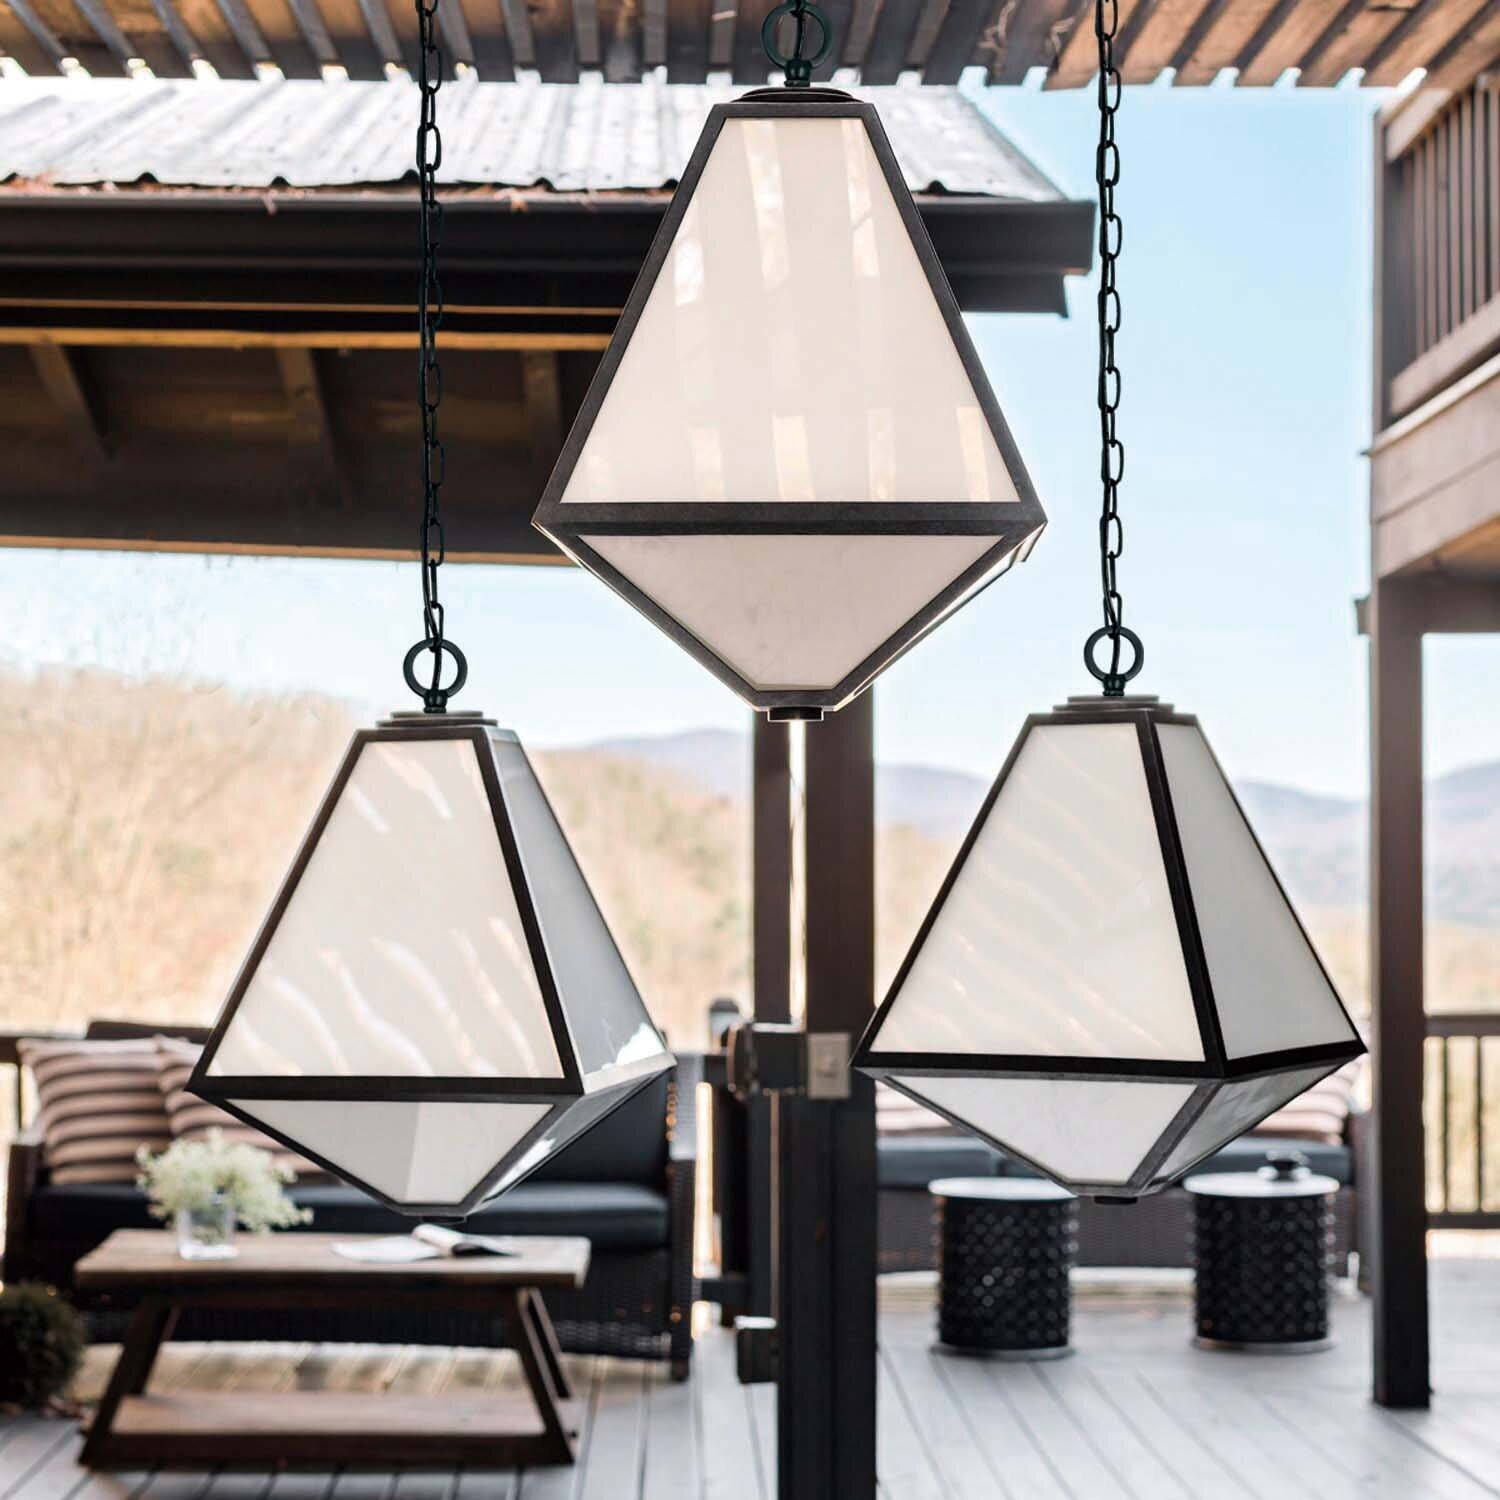 Large outdoor pendant lighting for ambiance